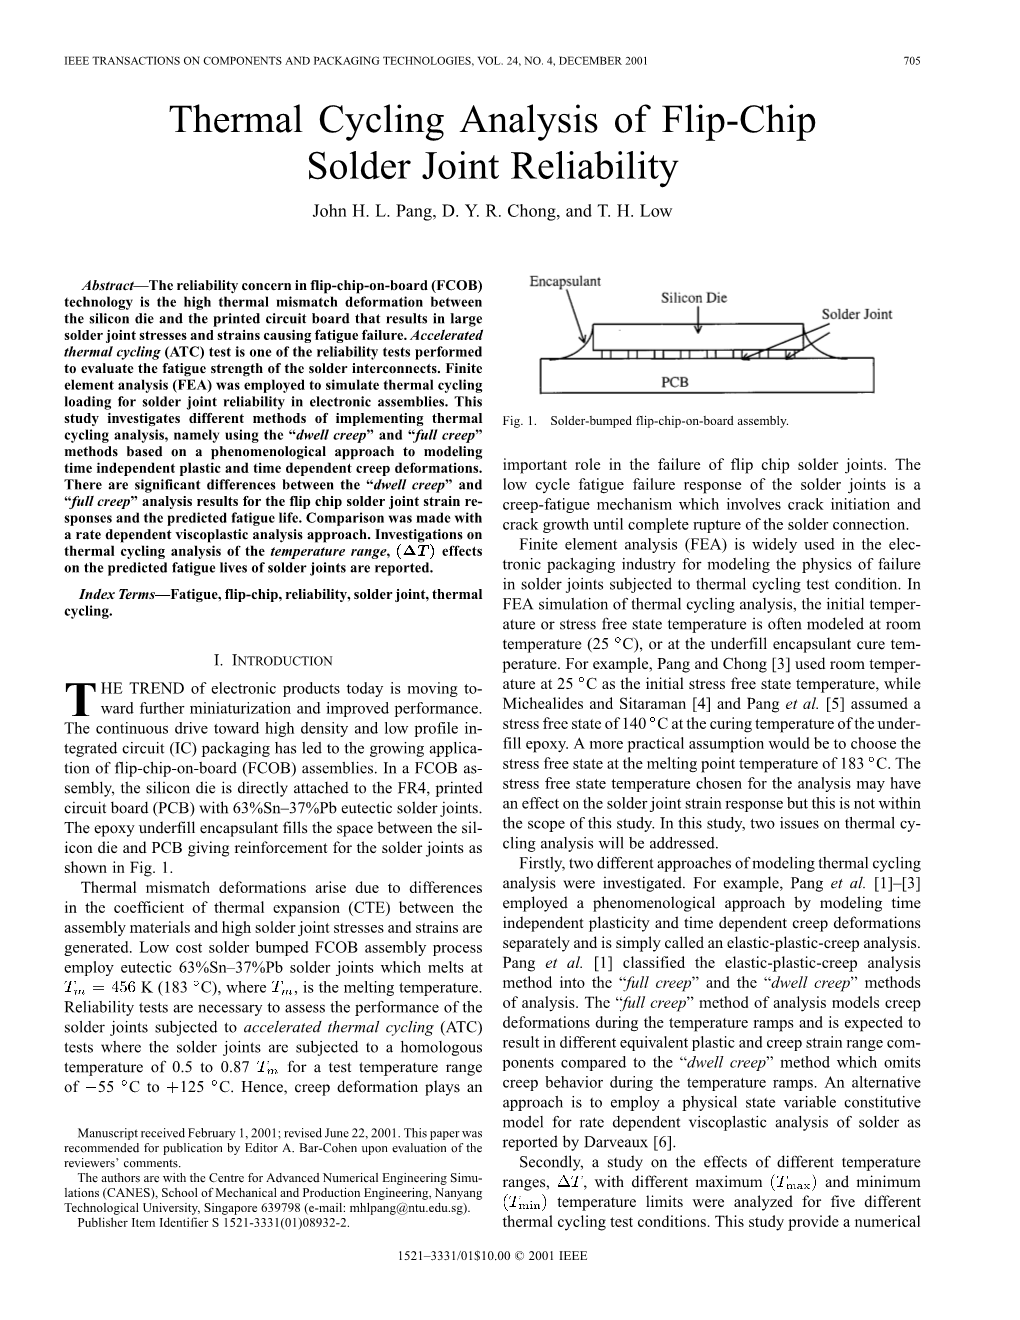 Thermal Cycling Analysis of Flip-Chip Solder Joint Reliability John H